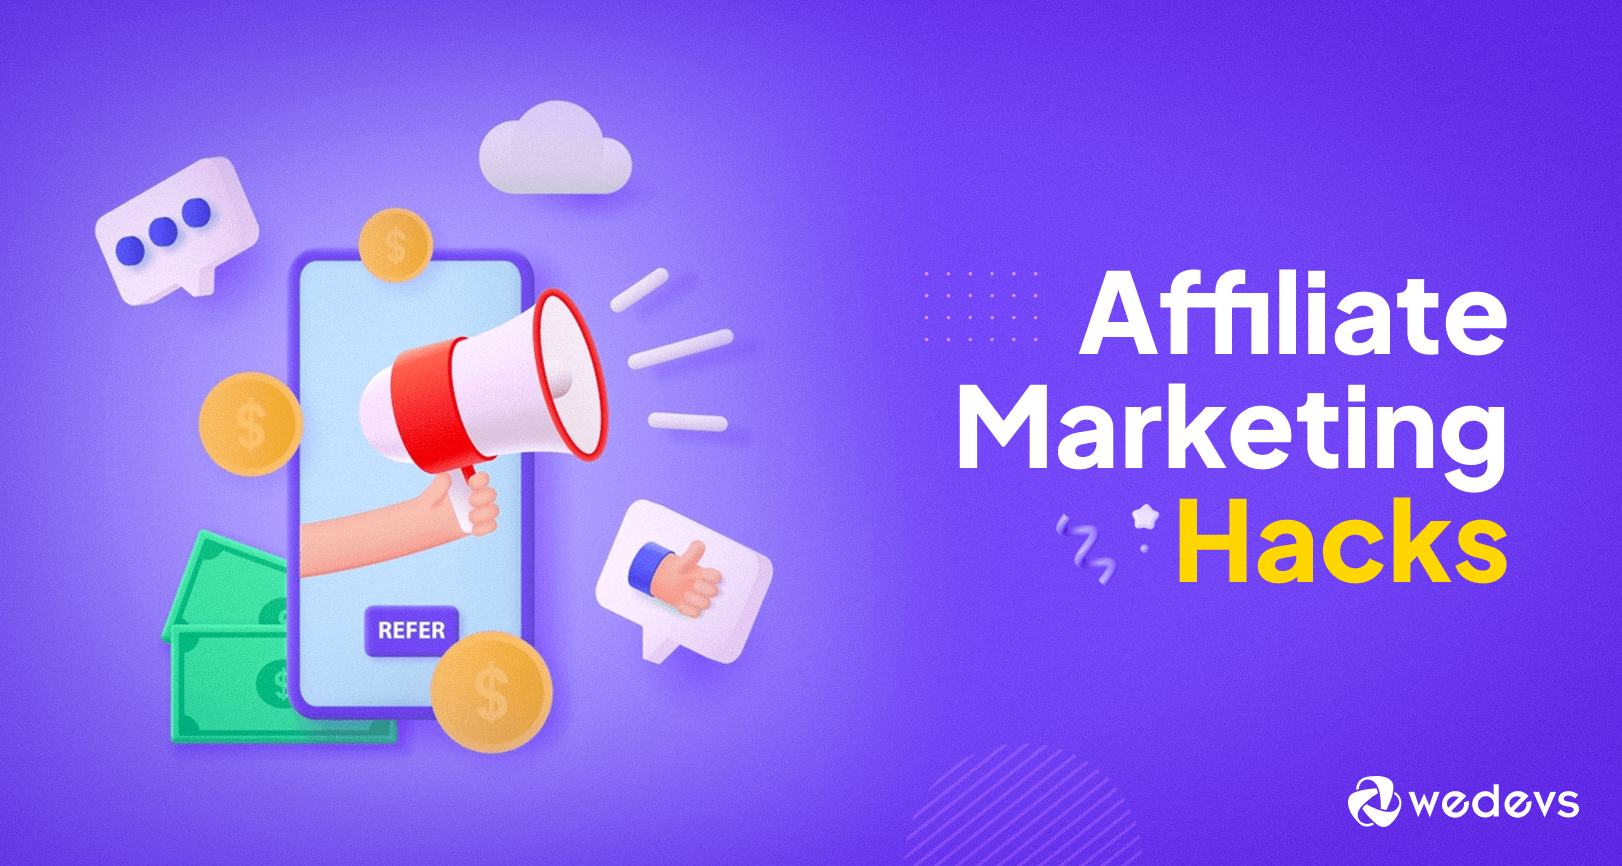 7 Secret Affiliate Marketing Hacks You Must Know Before You Start!